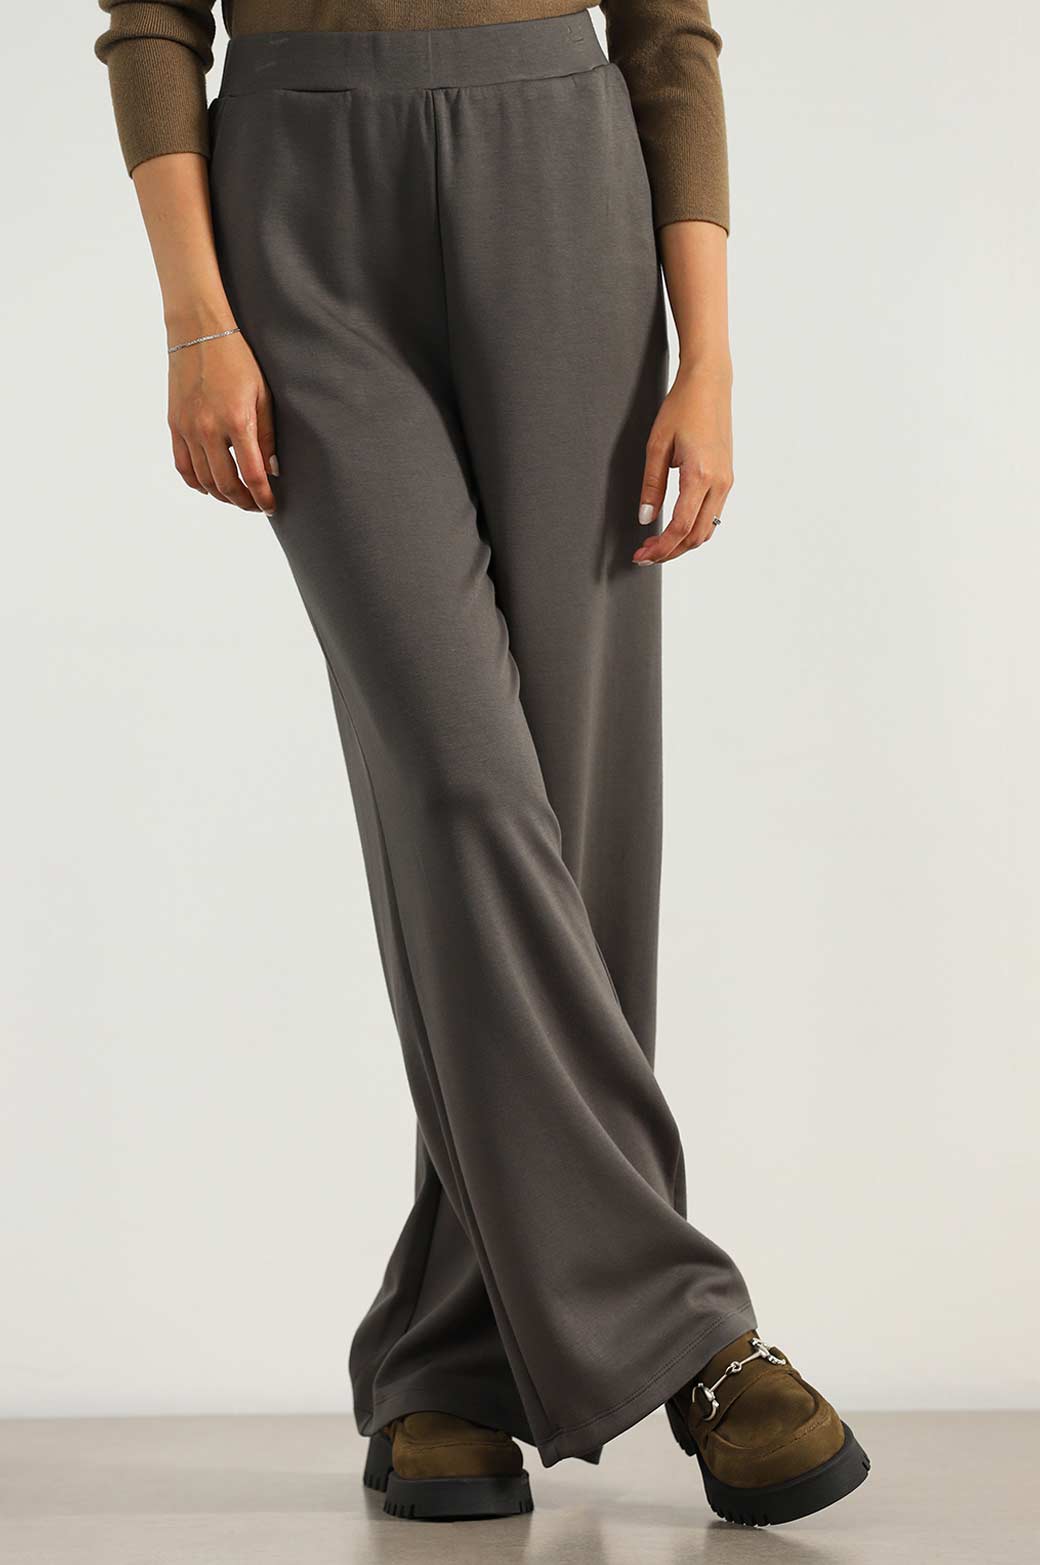 GREY ALL-DAY WIDE PANTS